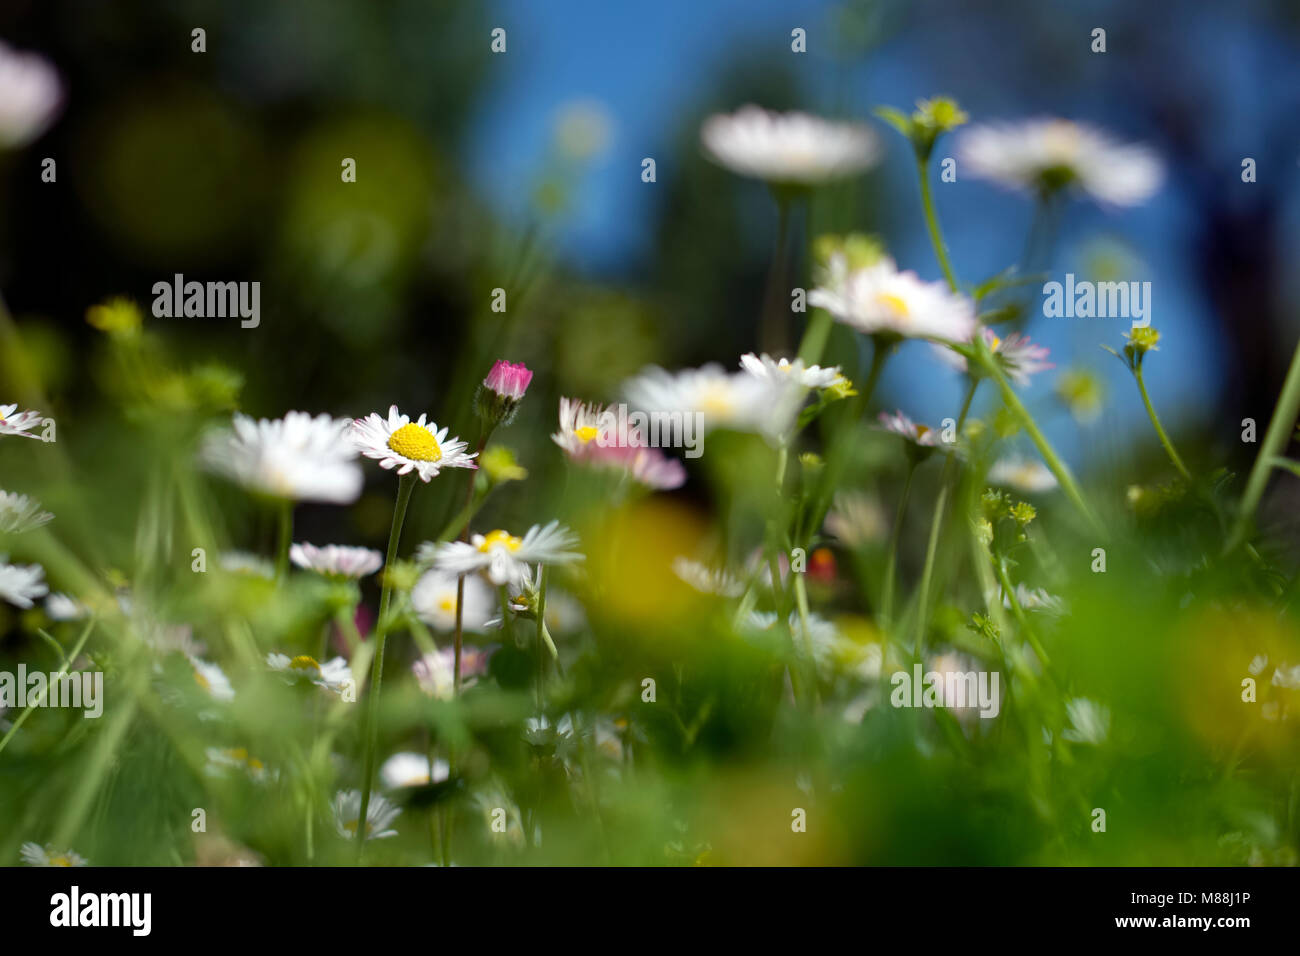 Daisies (Bellis perennis) in a field Stock Photo